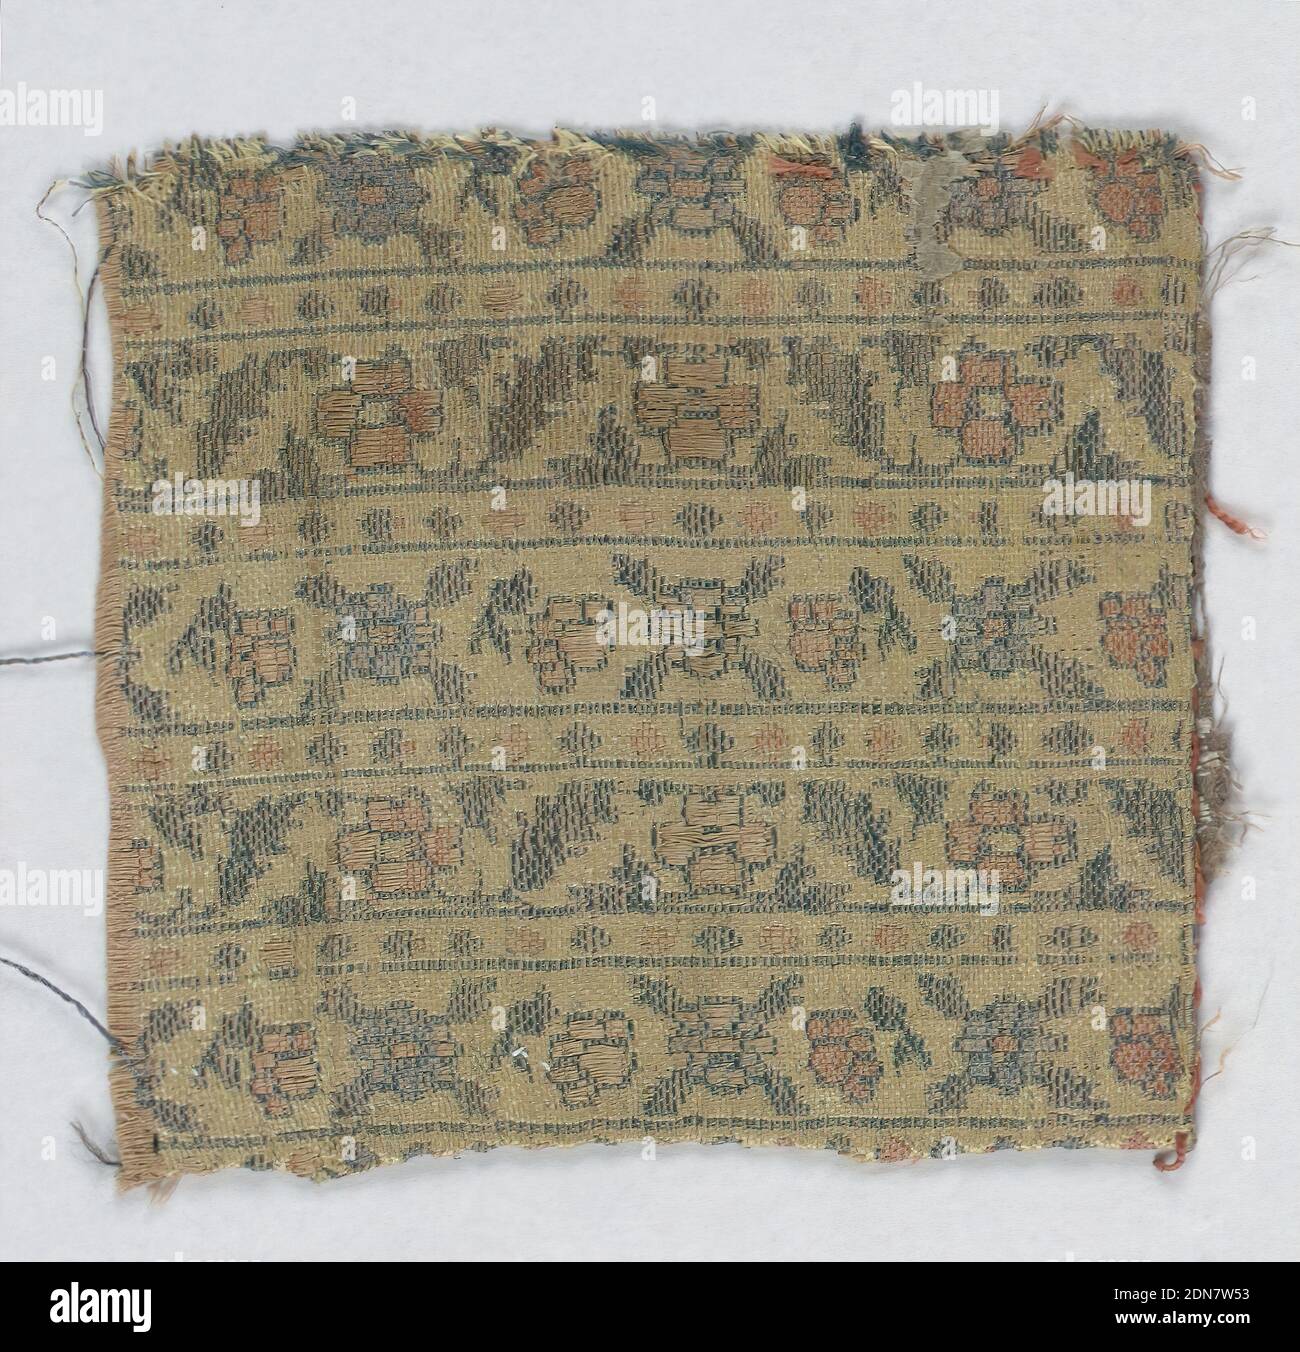 Fragment, Medium: silk Technique: woven, Light brown fragment with horizontal rows filled with flower heads and leaves in pale muted tones of blue, orange and green., possibly Turkey, 19th century, woven textiles, Fragment Stock Photo